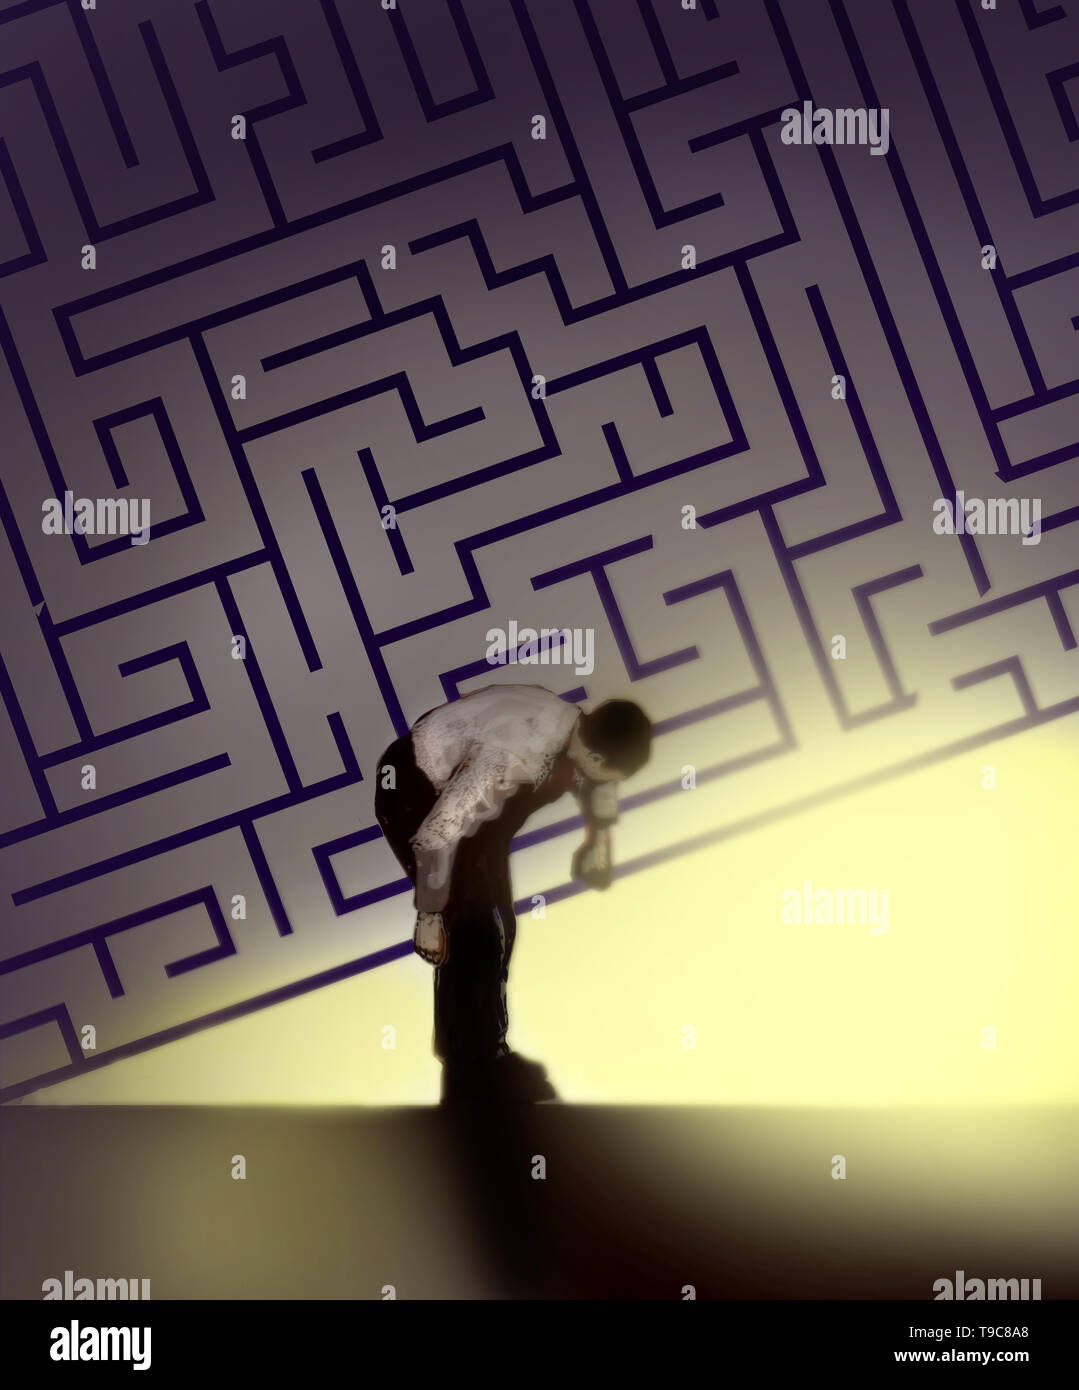 concept image of a man lifting up a maze to reveal bright light depicting a positive outcome Stock Photo